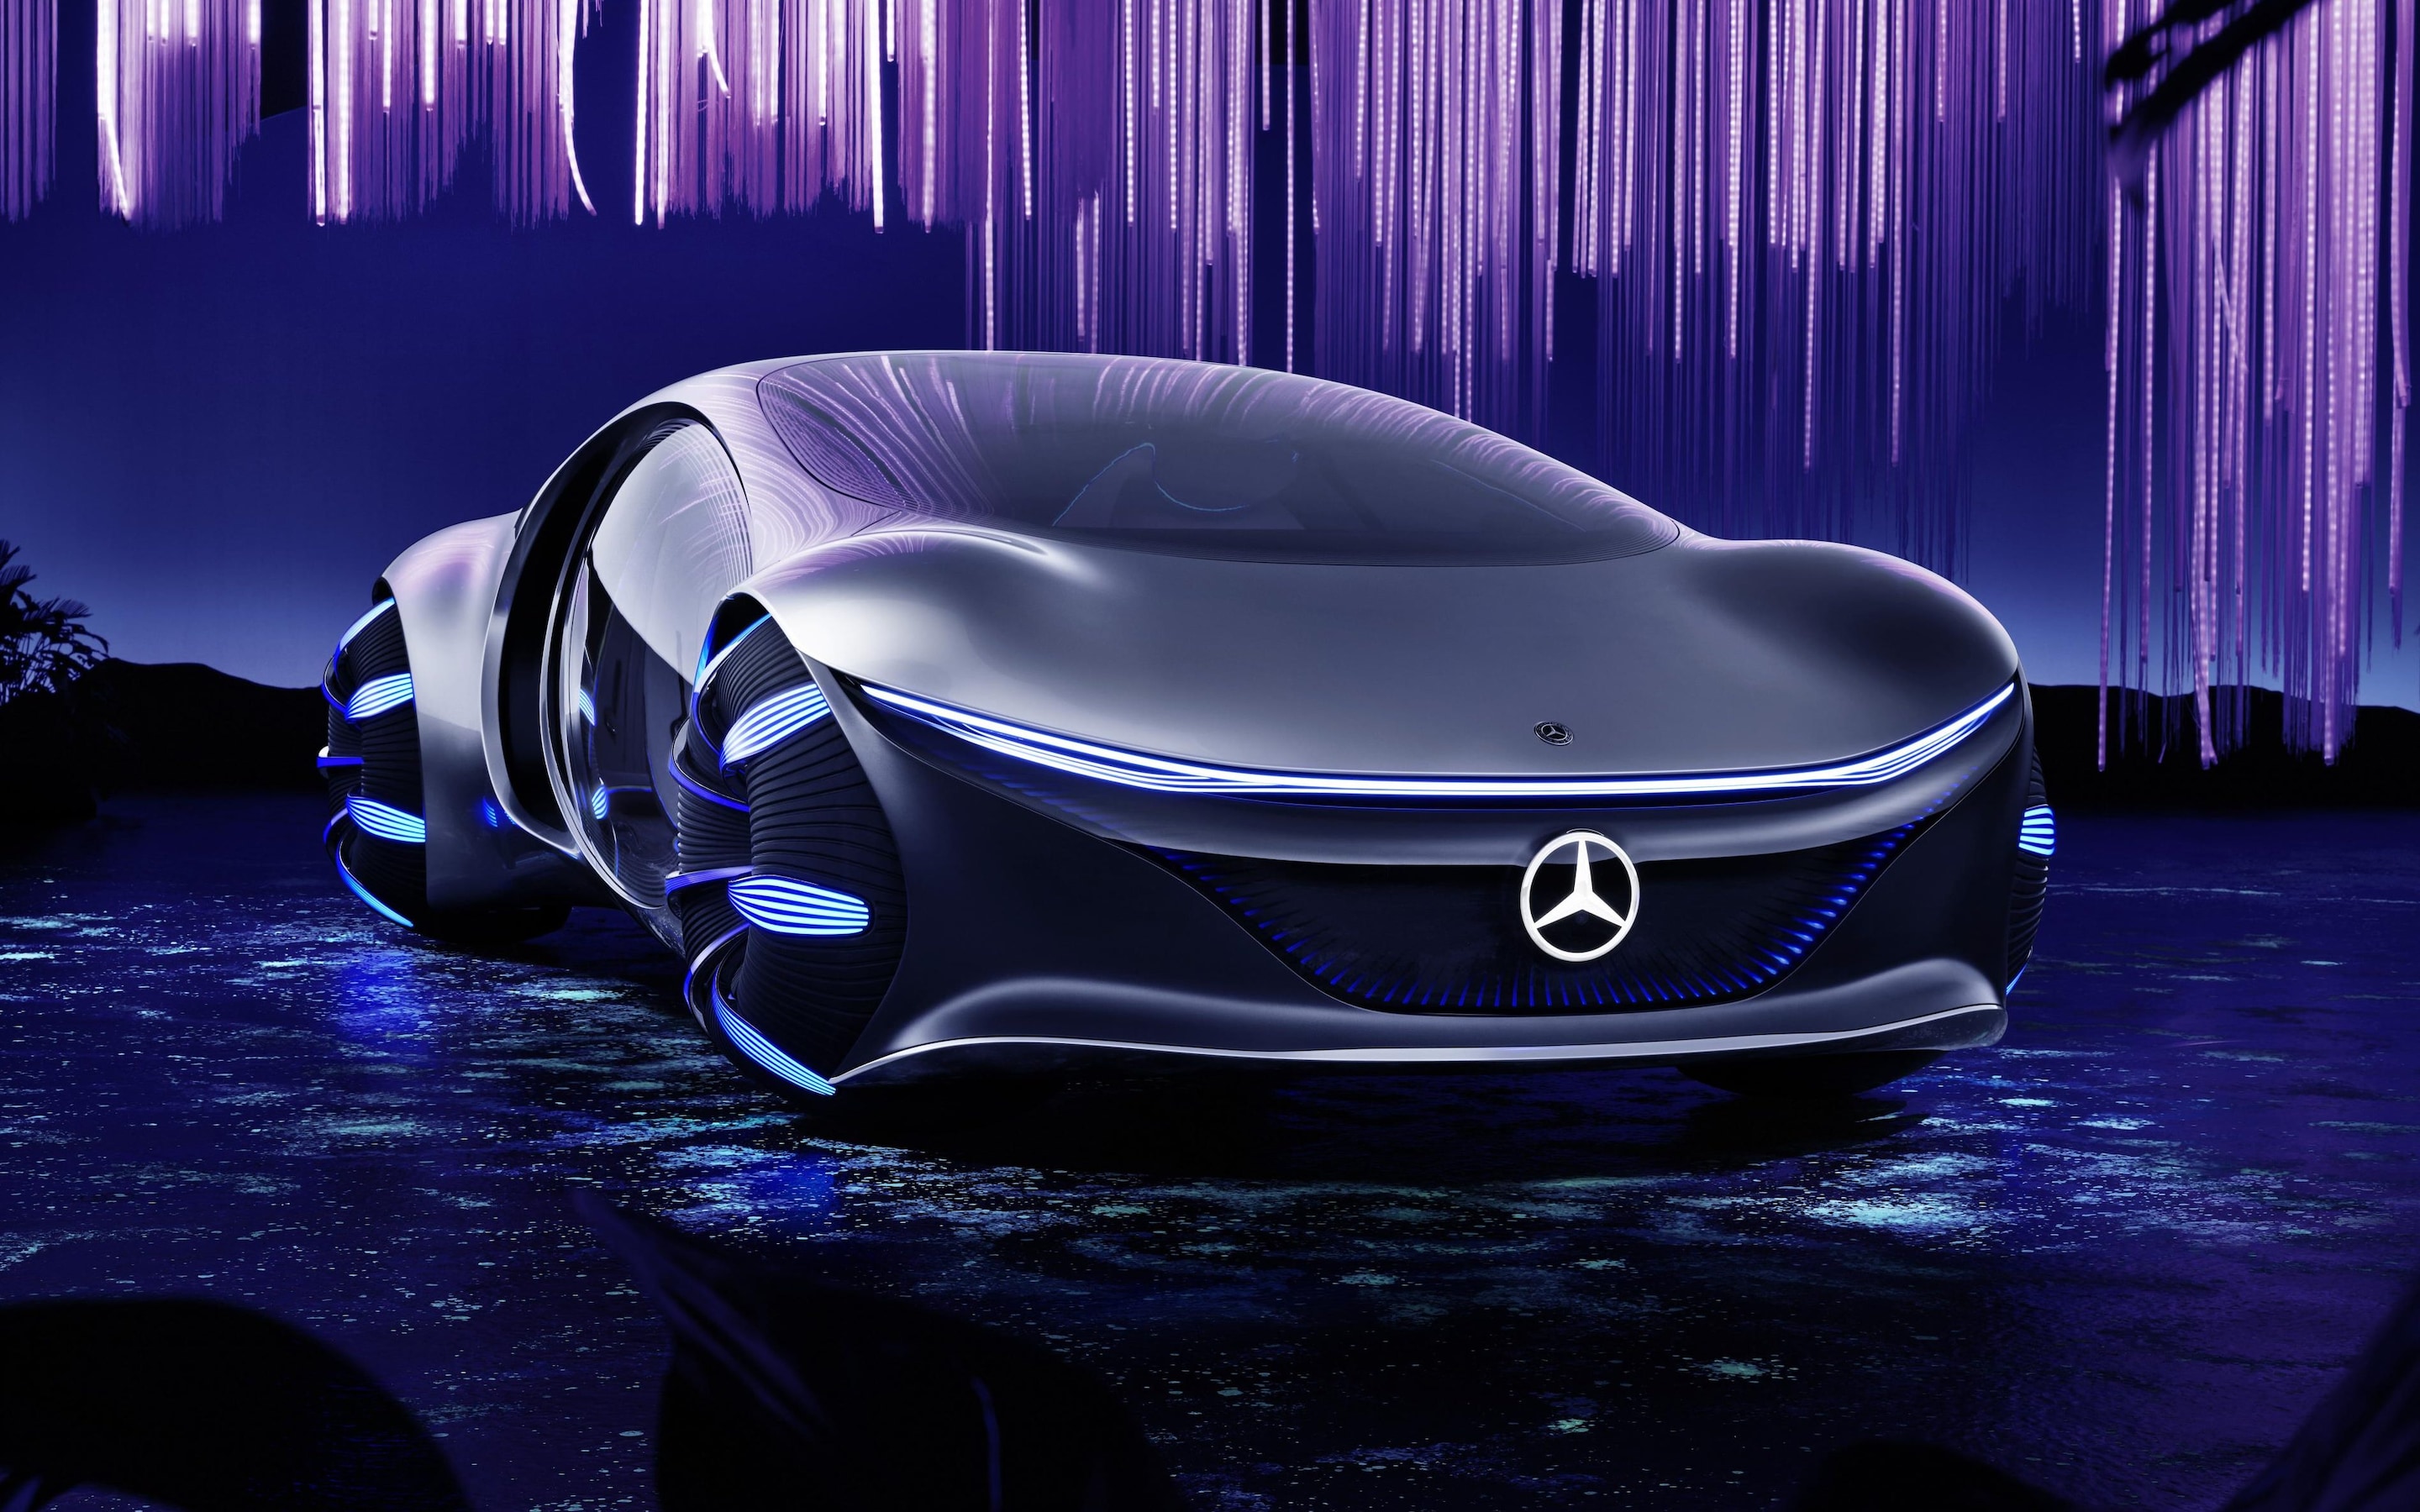 Mercedes' latest vision of the future is inspired by Avatar film